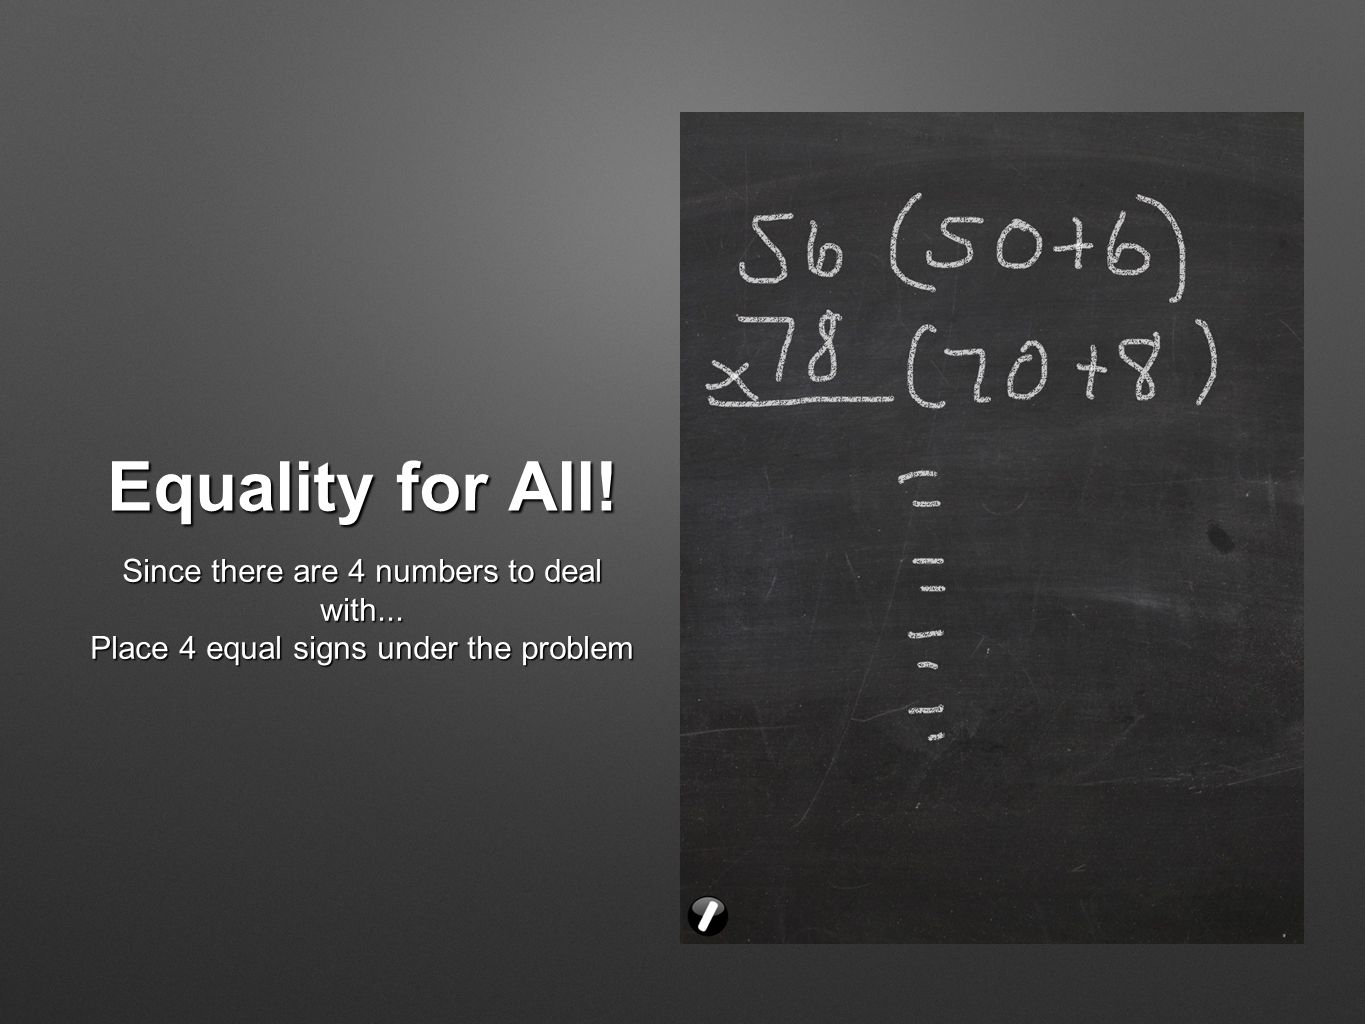 Equality for All! Since there are 4 numbers to deal with... Place 4 equal signs under the problem